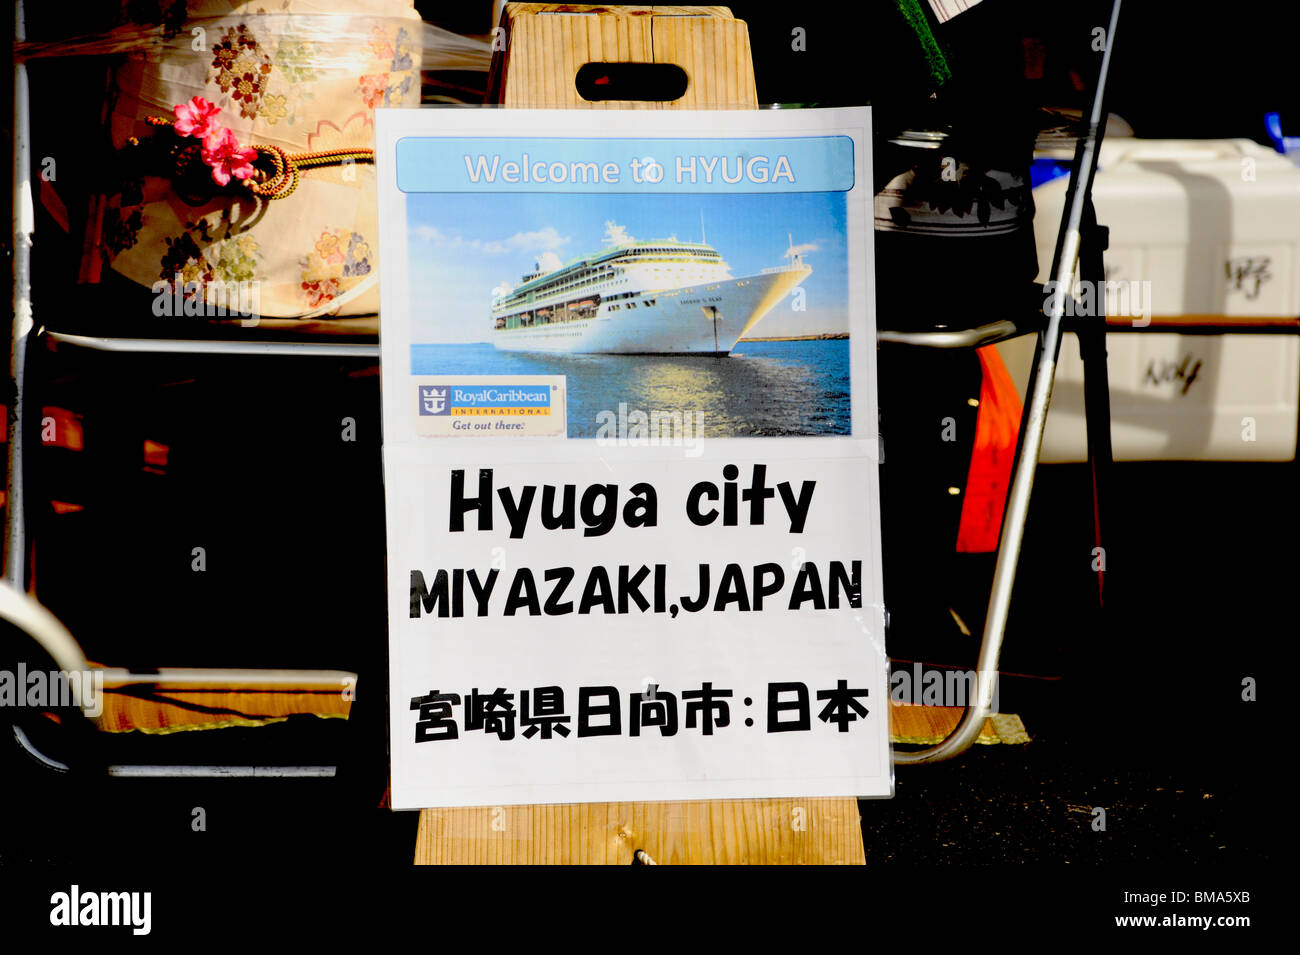 Welcome sign for Royal Caribbean Cruise Ship to Hyuga, Japan Stock Photo